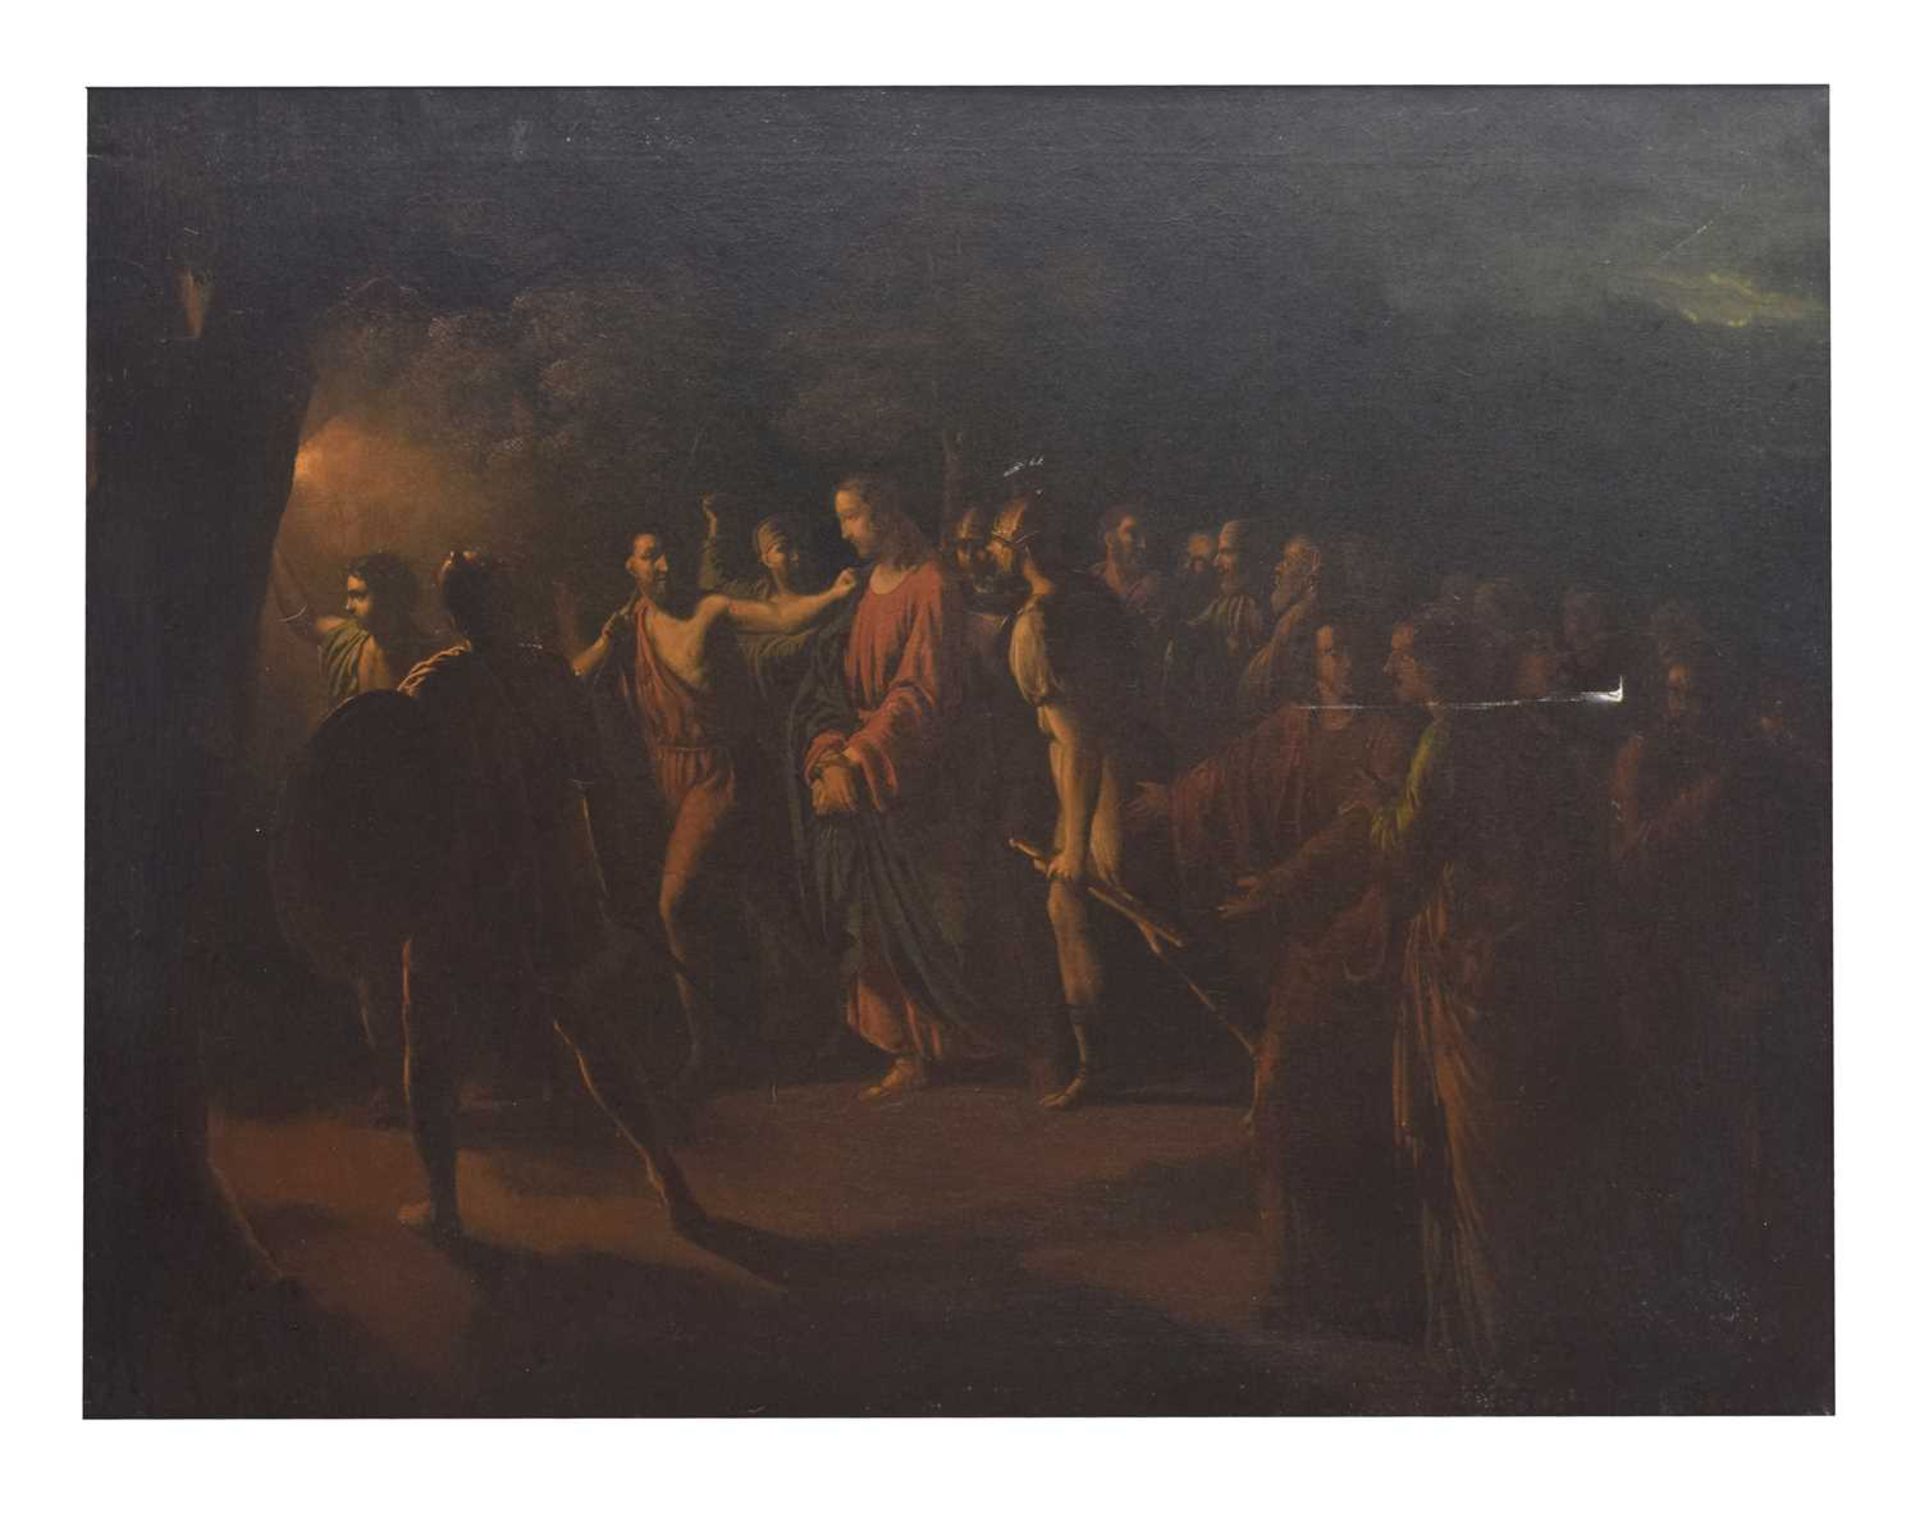 18th century Continental School - Oil on canvas - The Betrayal of Christ - Image 10 of 11